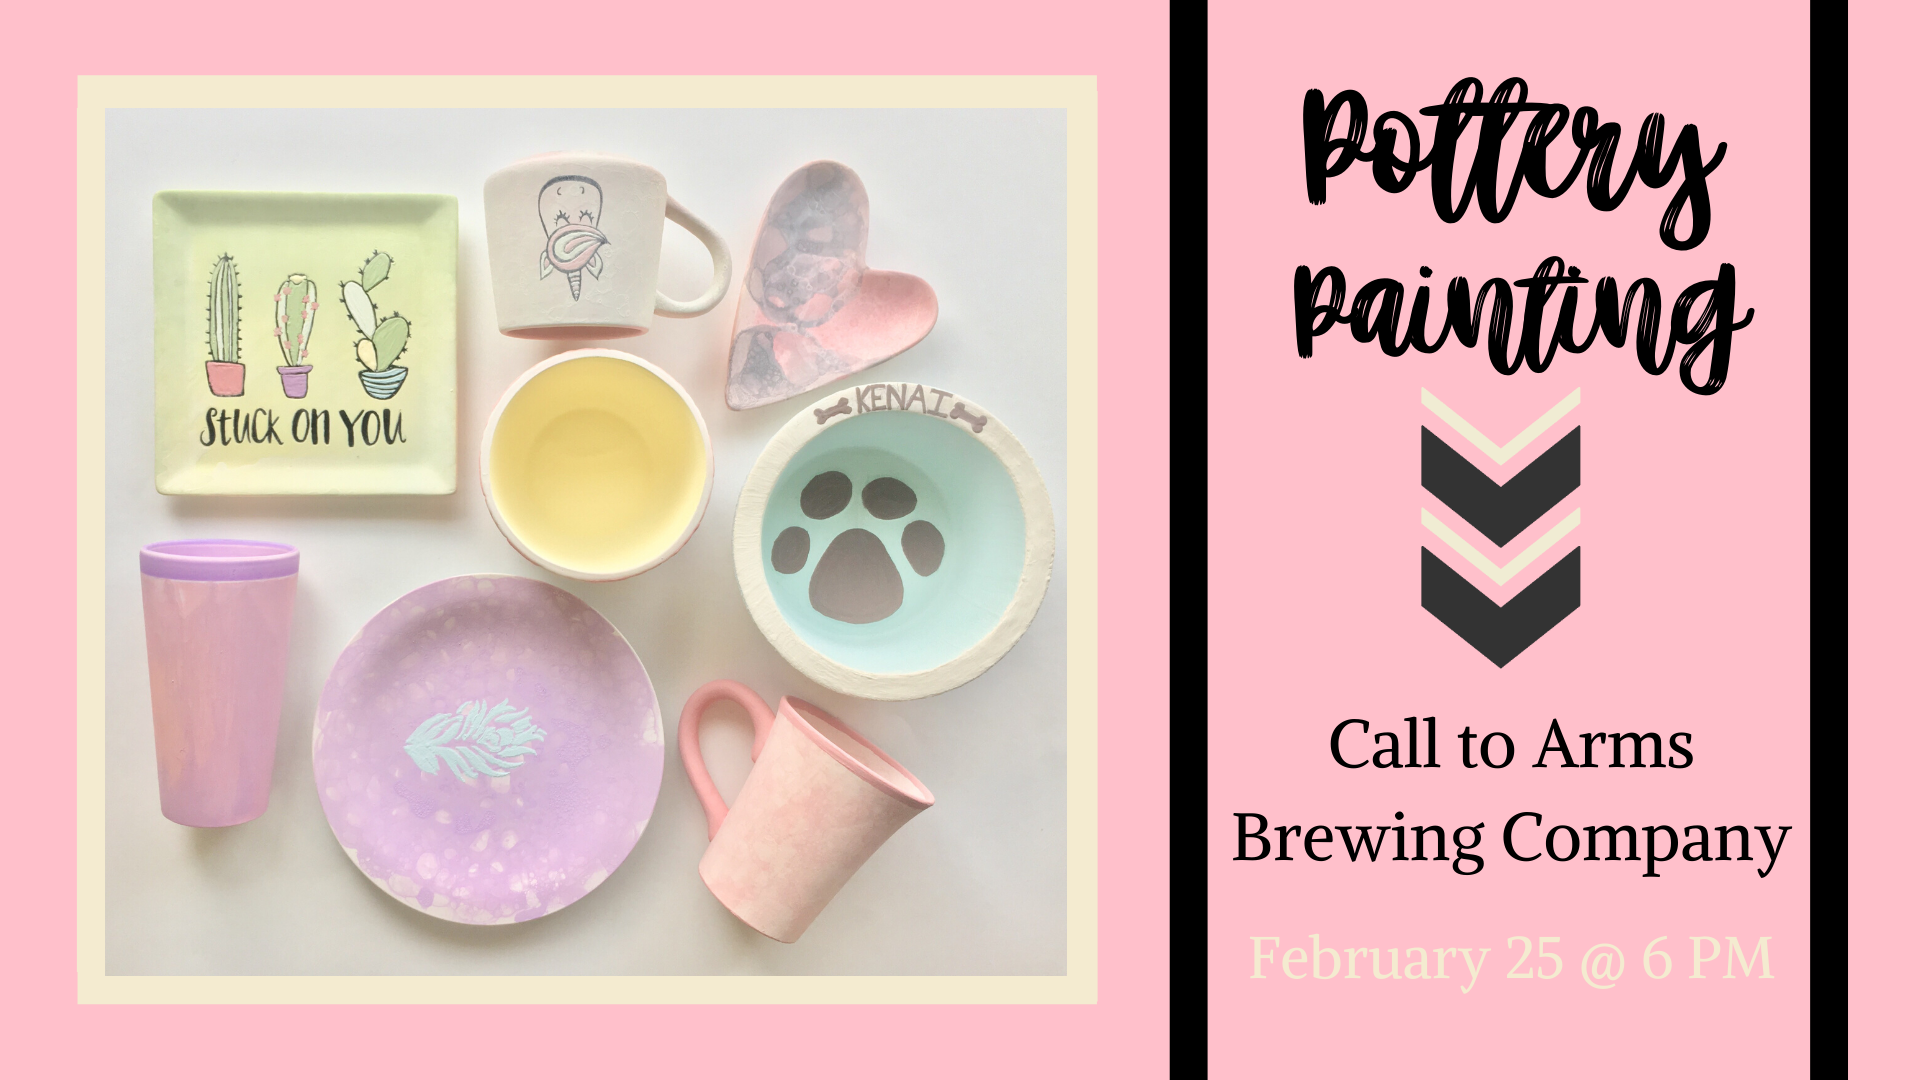 Pottery Painting at Call to Arms Brewing Company